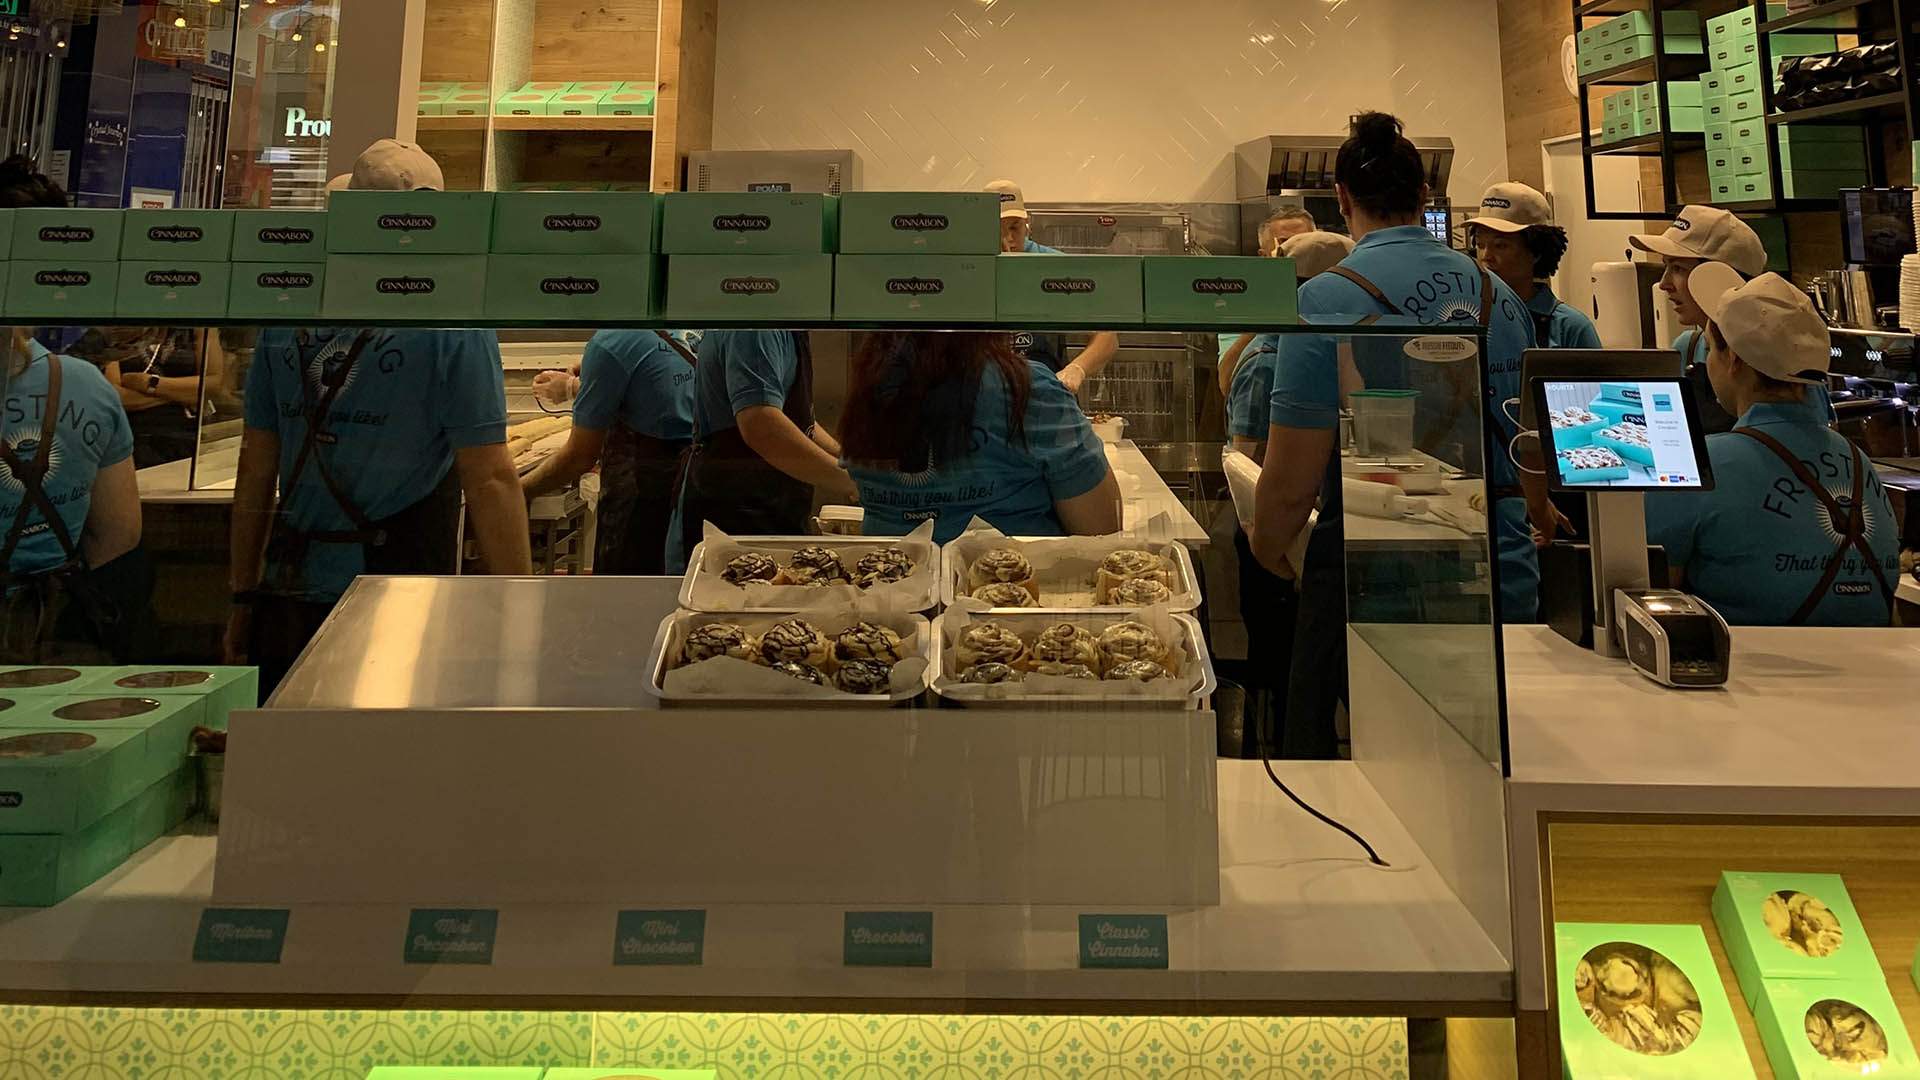 Prepare to Get Sticky: Cinnabon Is Opening Its Long-Awaited First Sydney Store in January